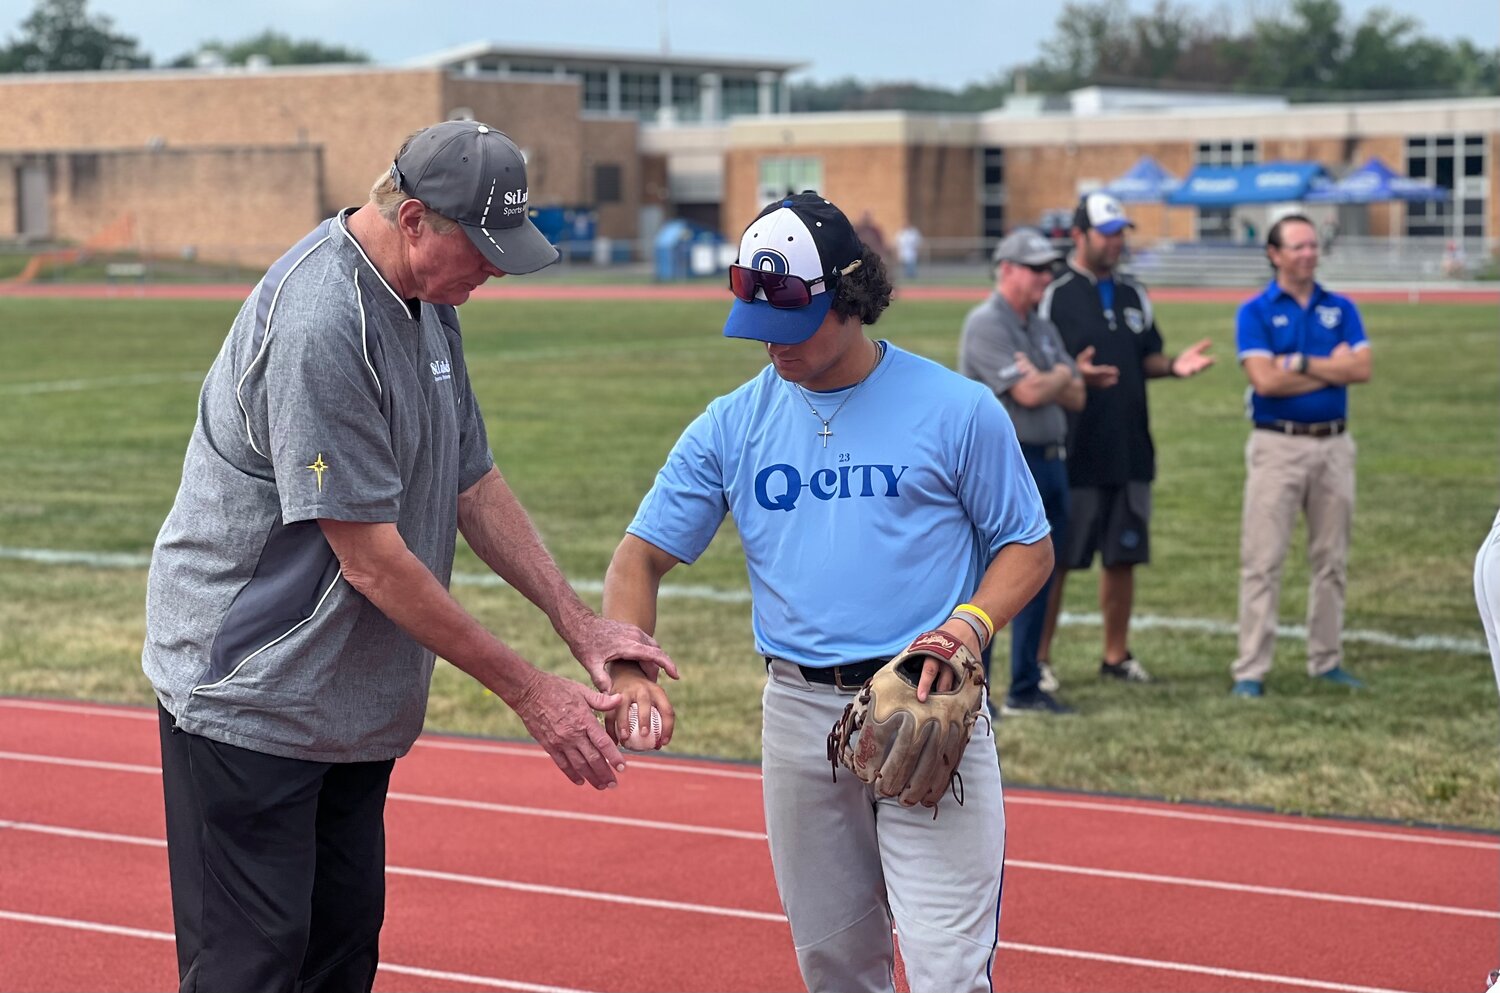 Steve Carlton works with Quakertown High School senior Danny Qualteria on his pitching technique at a baseball clinic sponsored by St. Luke’s on Sept. 9.